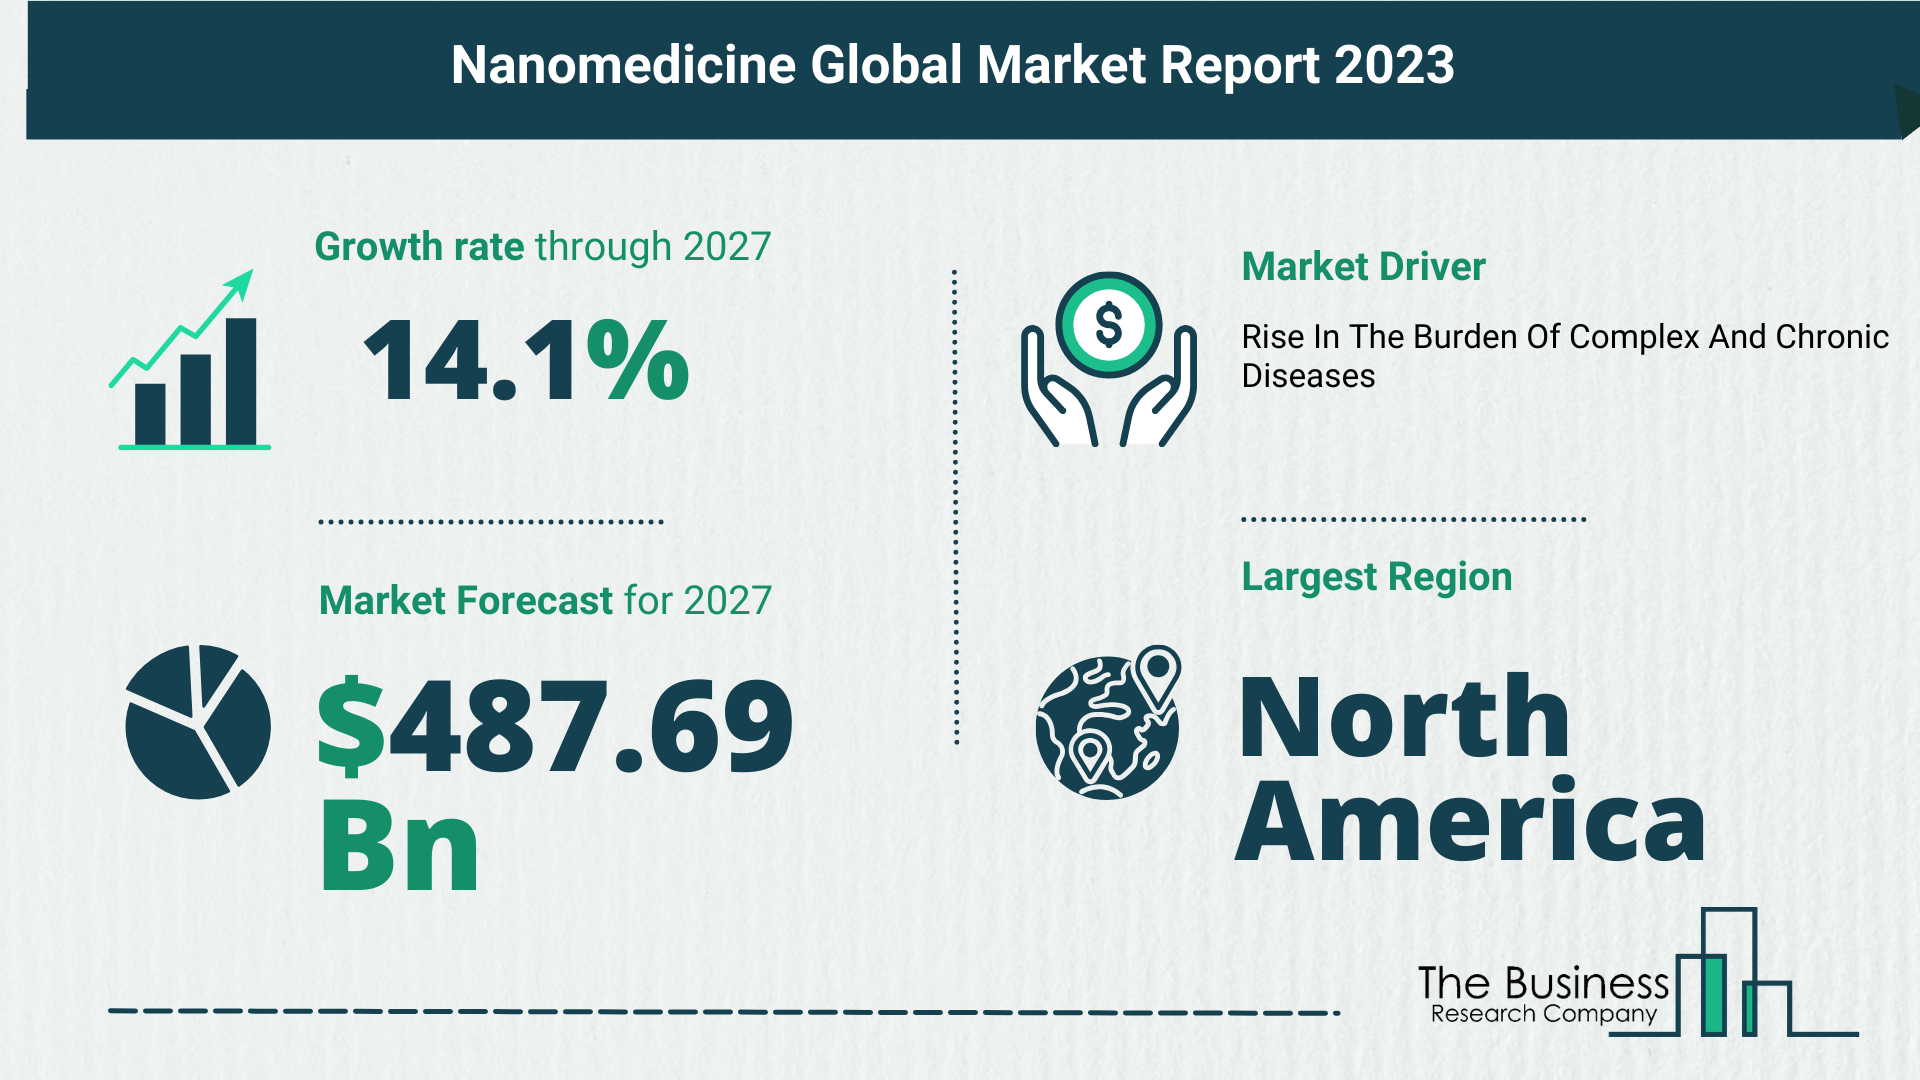 Top 5 Insights From The Nanomedicine Market Report 2023